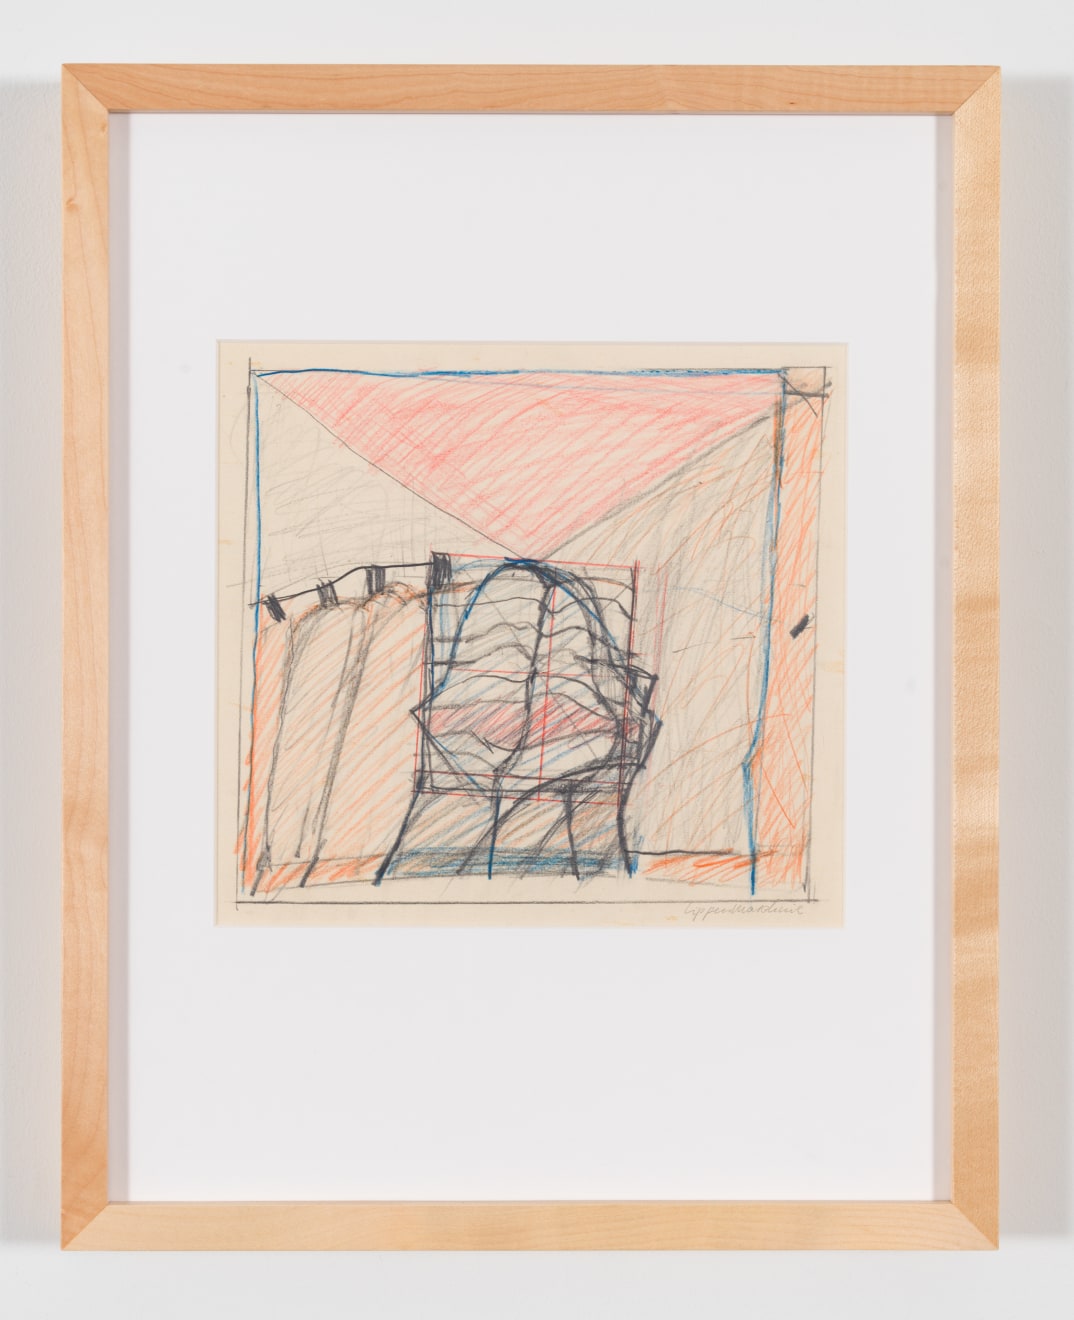 Lippenmaschine, 1964, pencil and colored pencil on paper